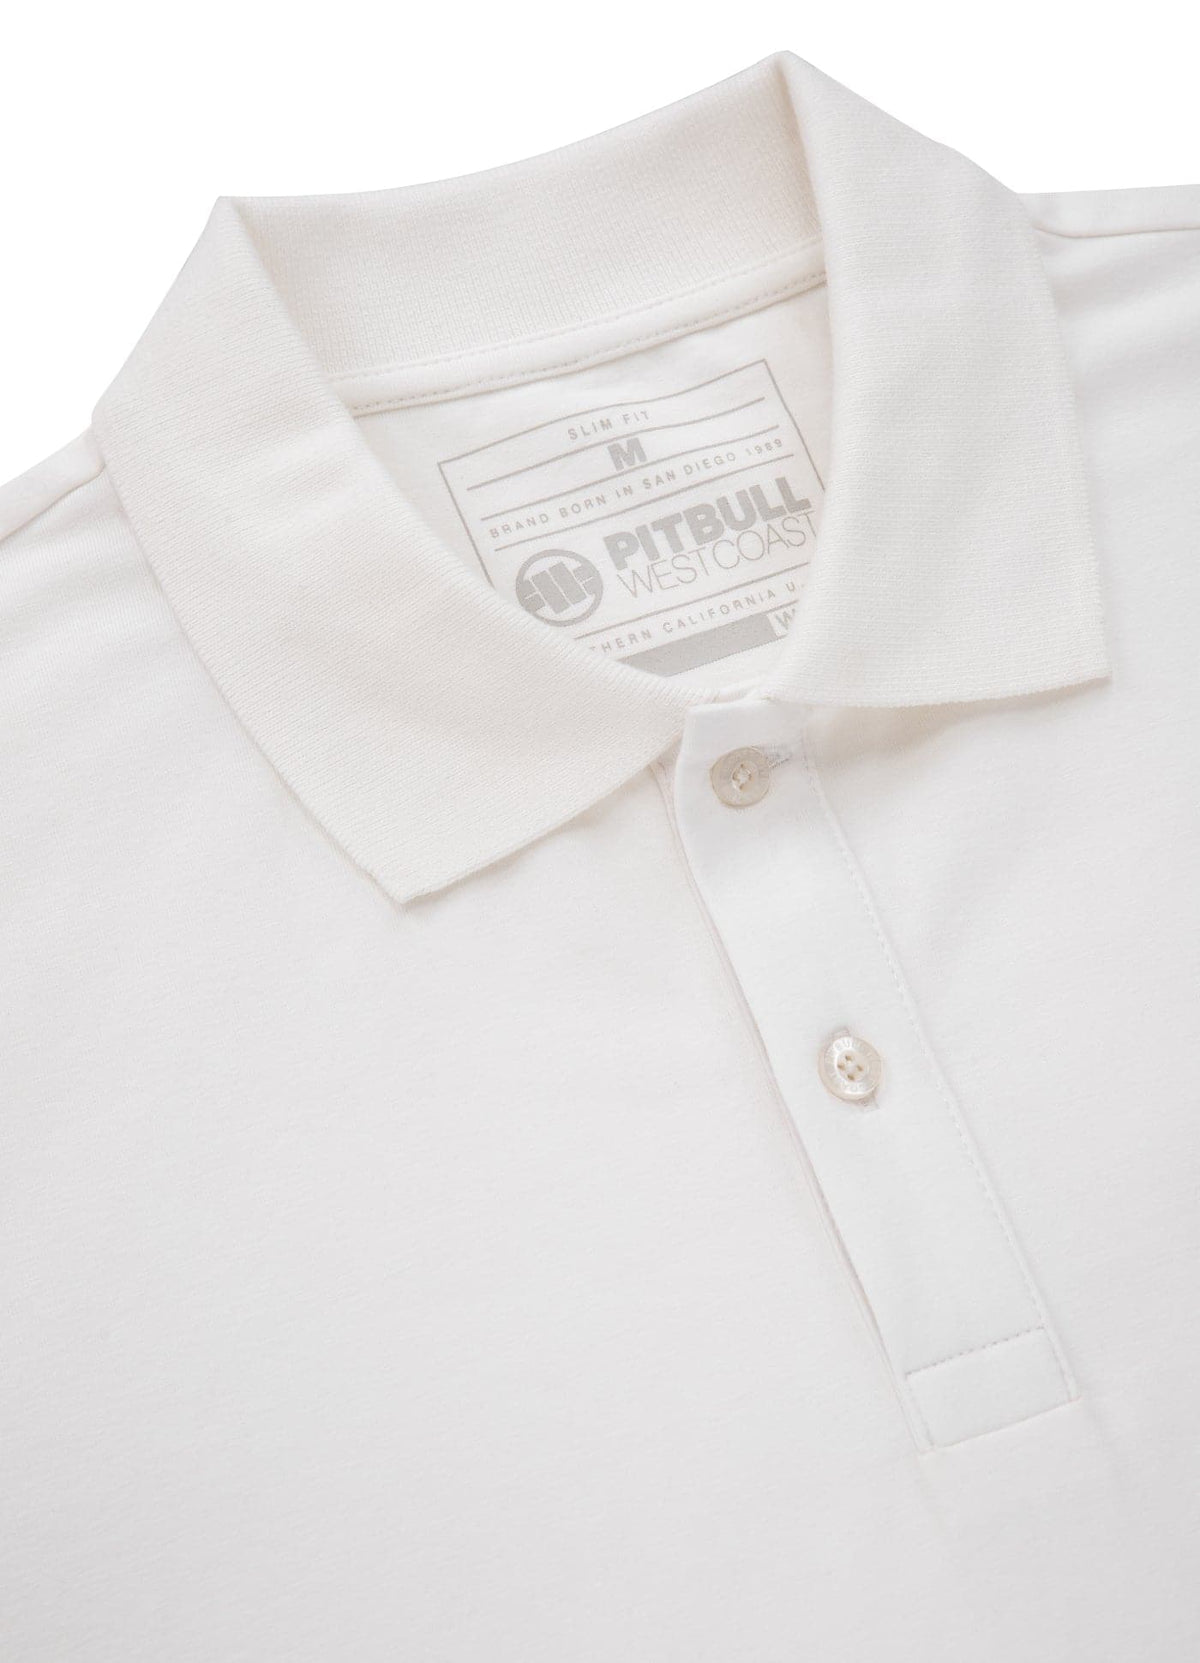 SLIM FIT SMALL LOGO 210 Off White Polo T-shirt